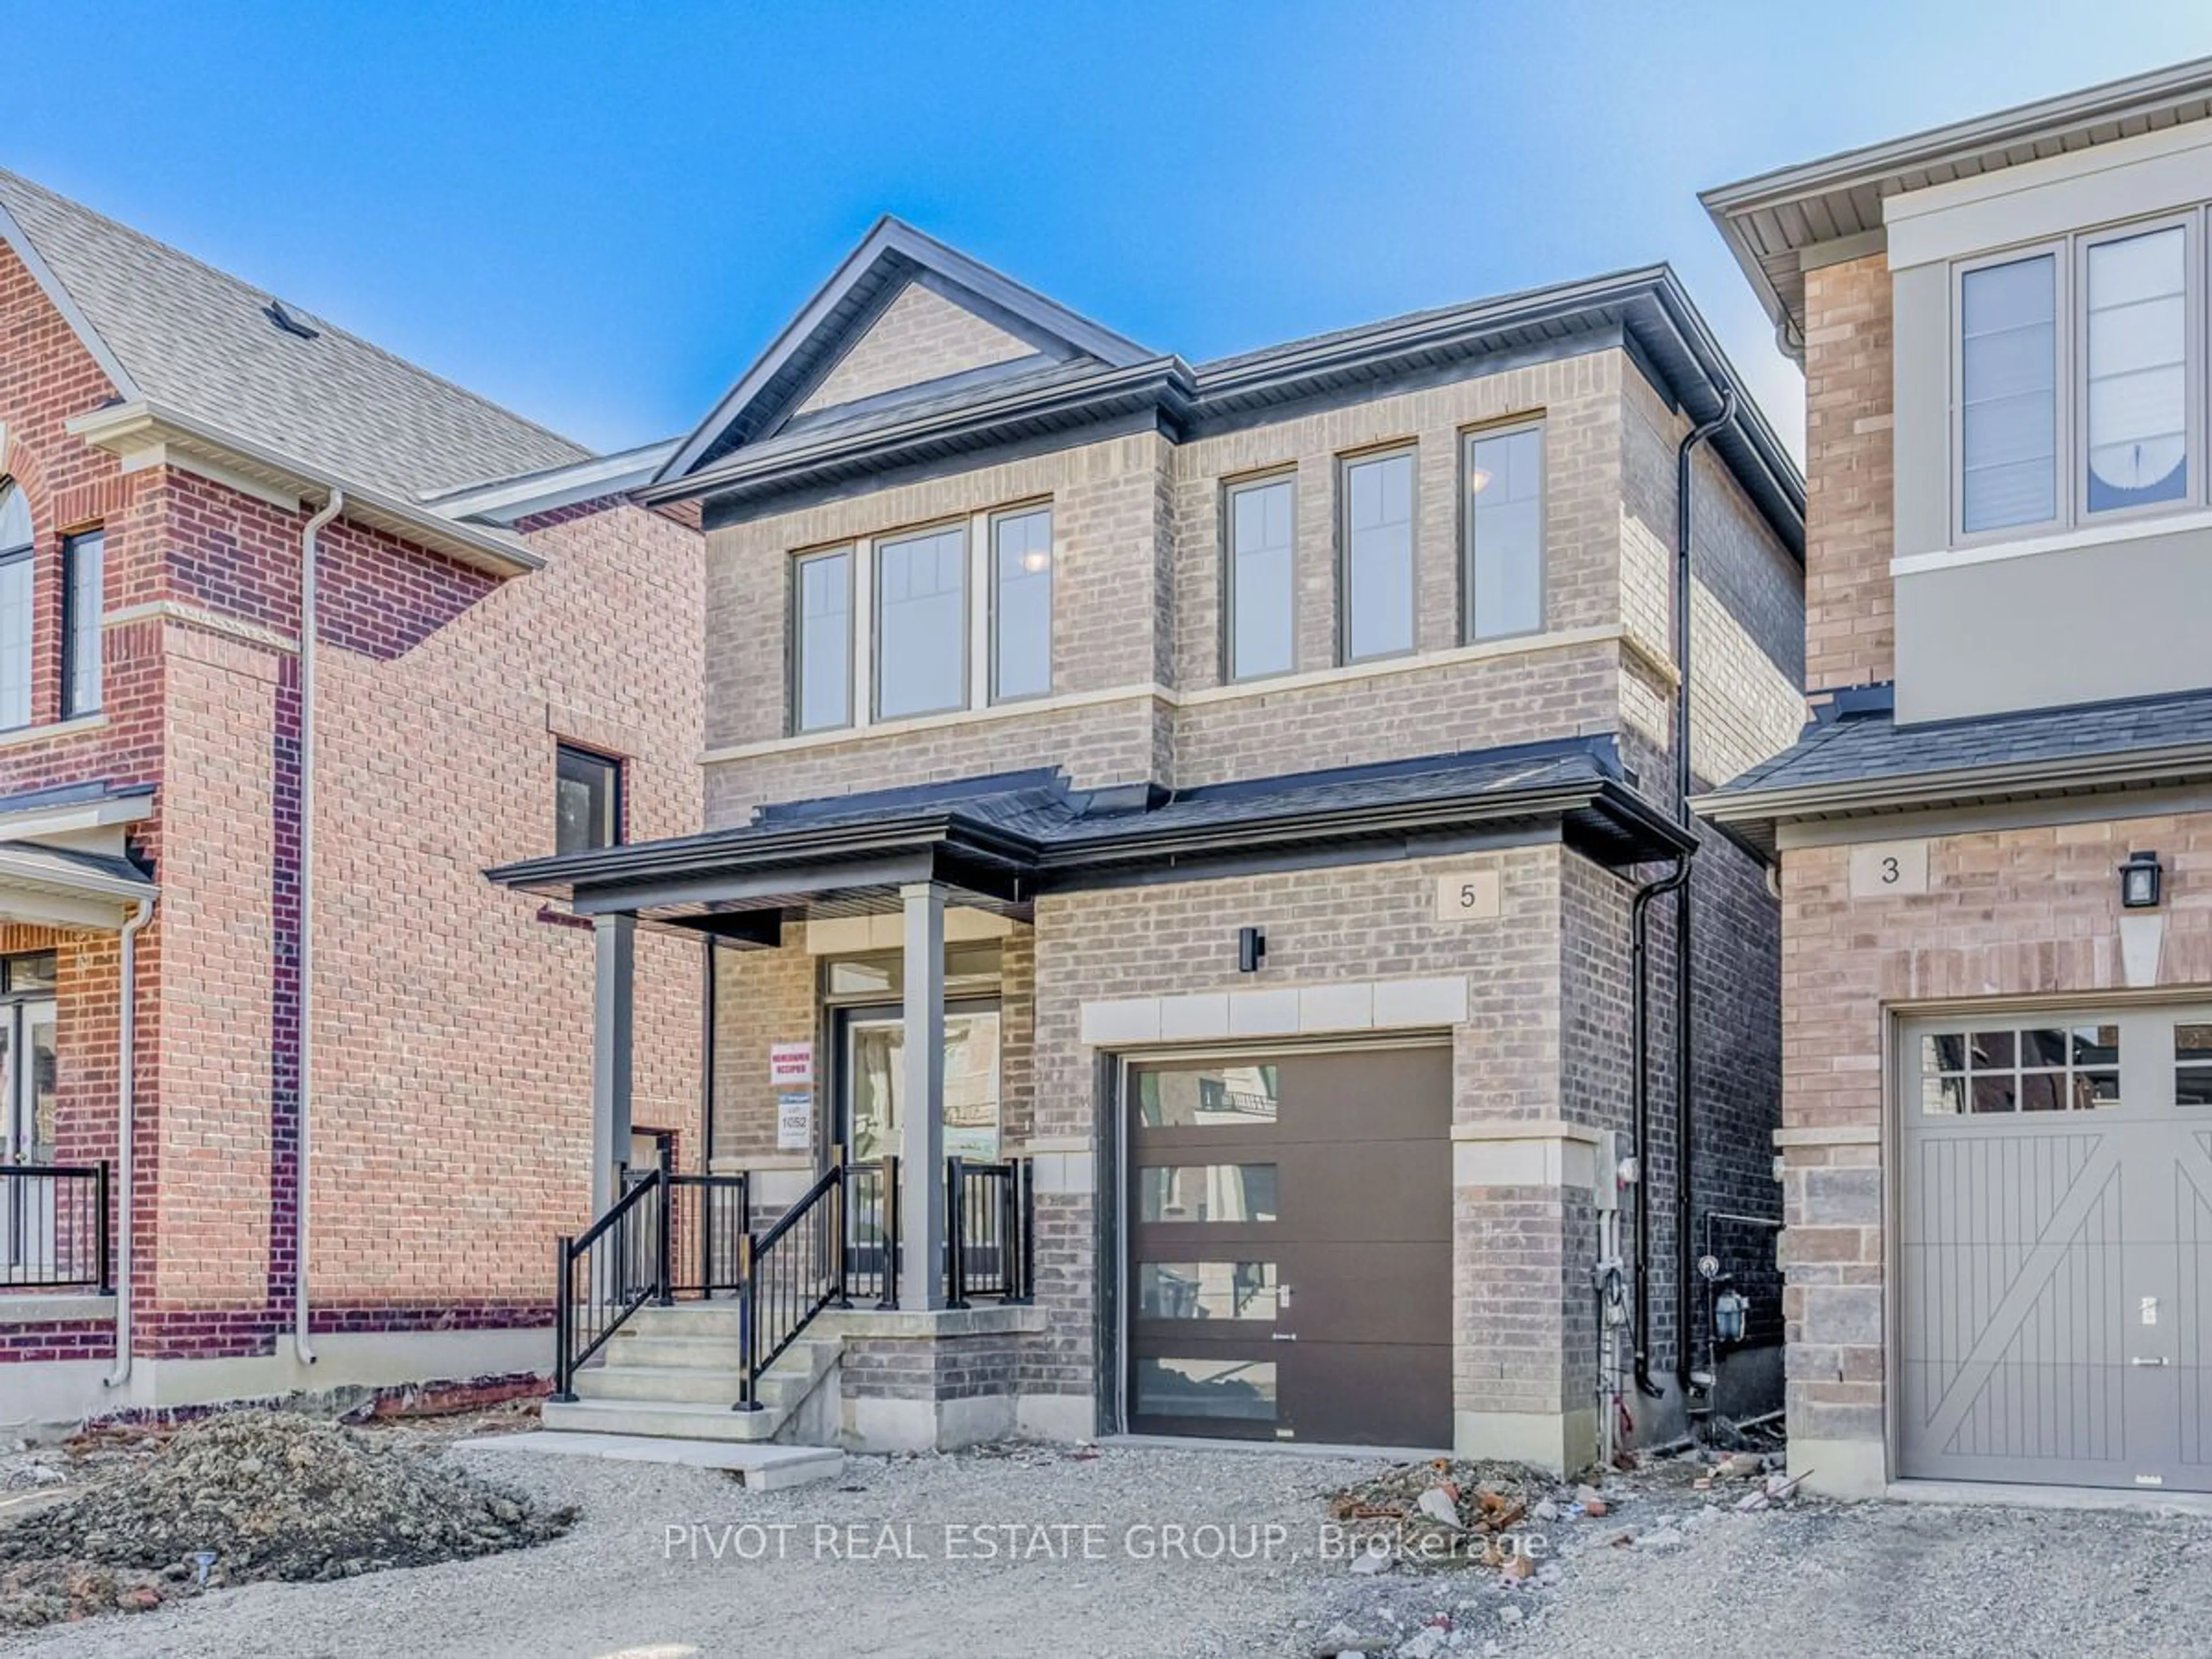 Home with brick exterior material for 5 Calabria Dr, Caledon Ontario L7C 4L3